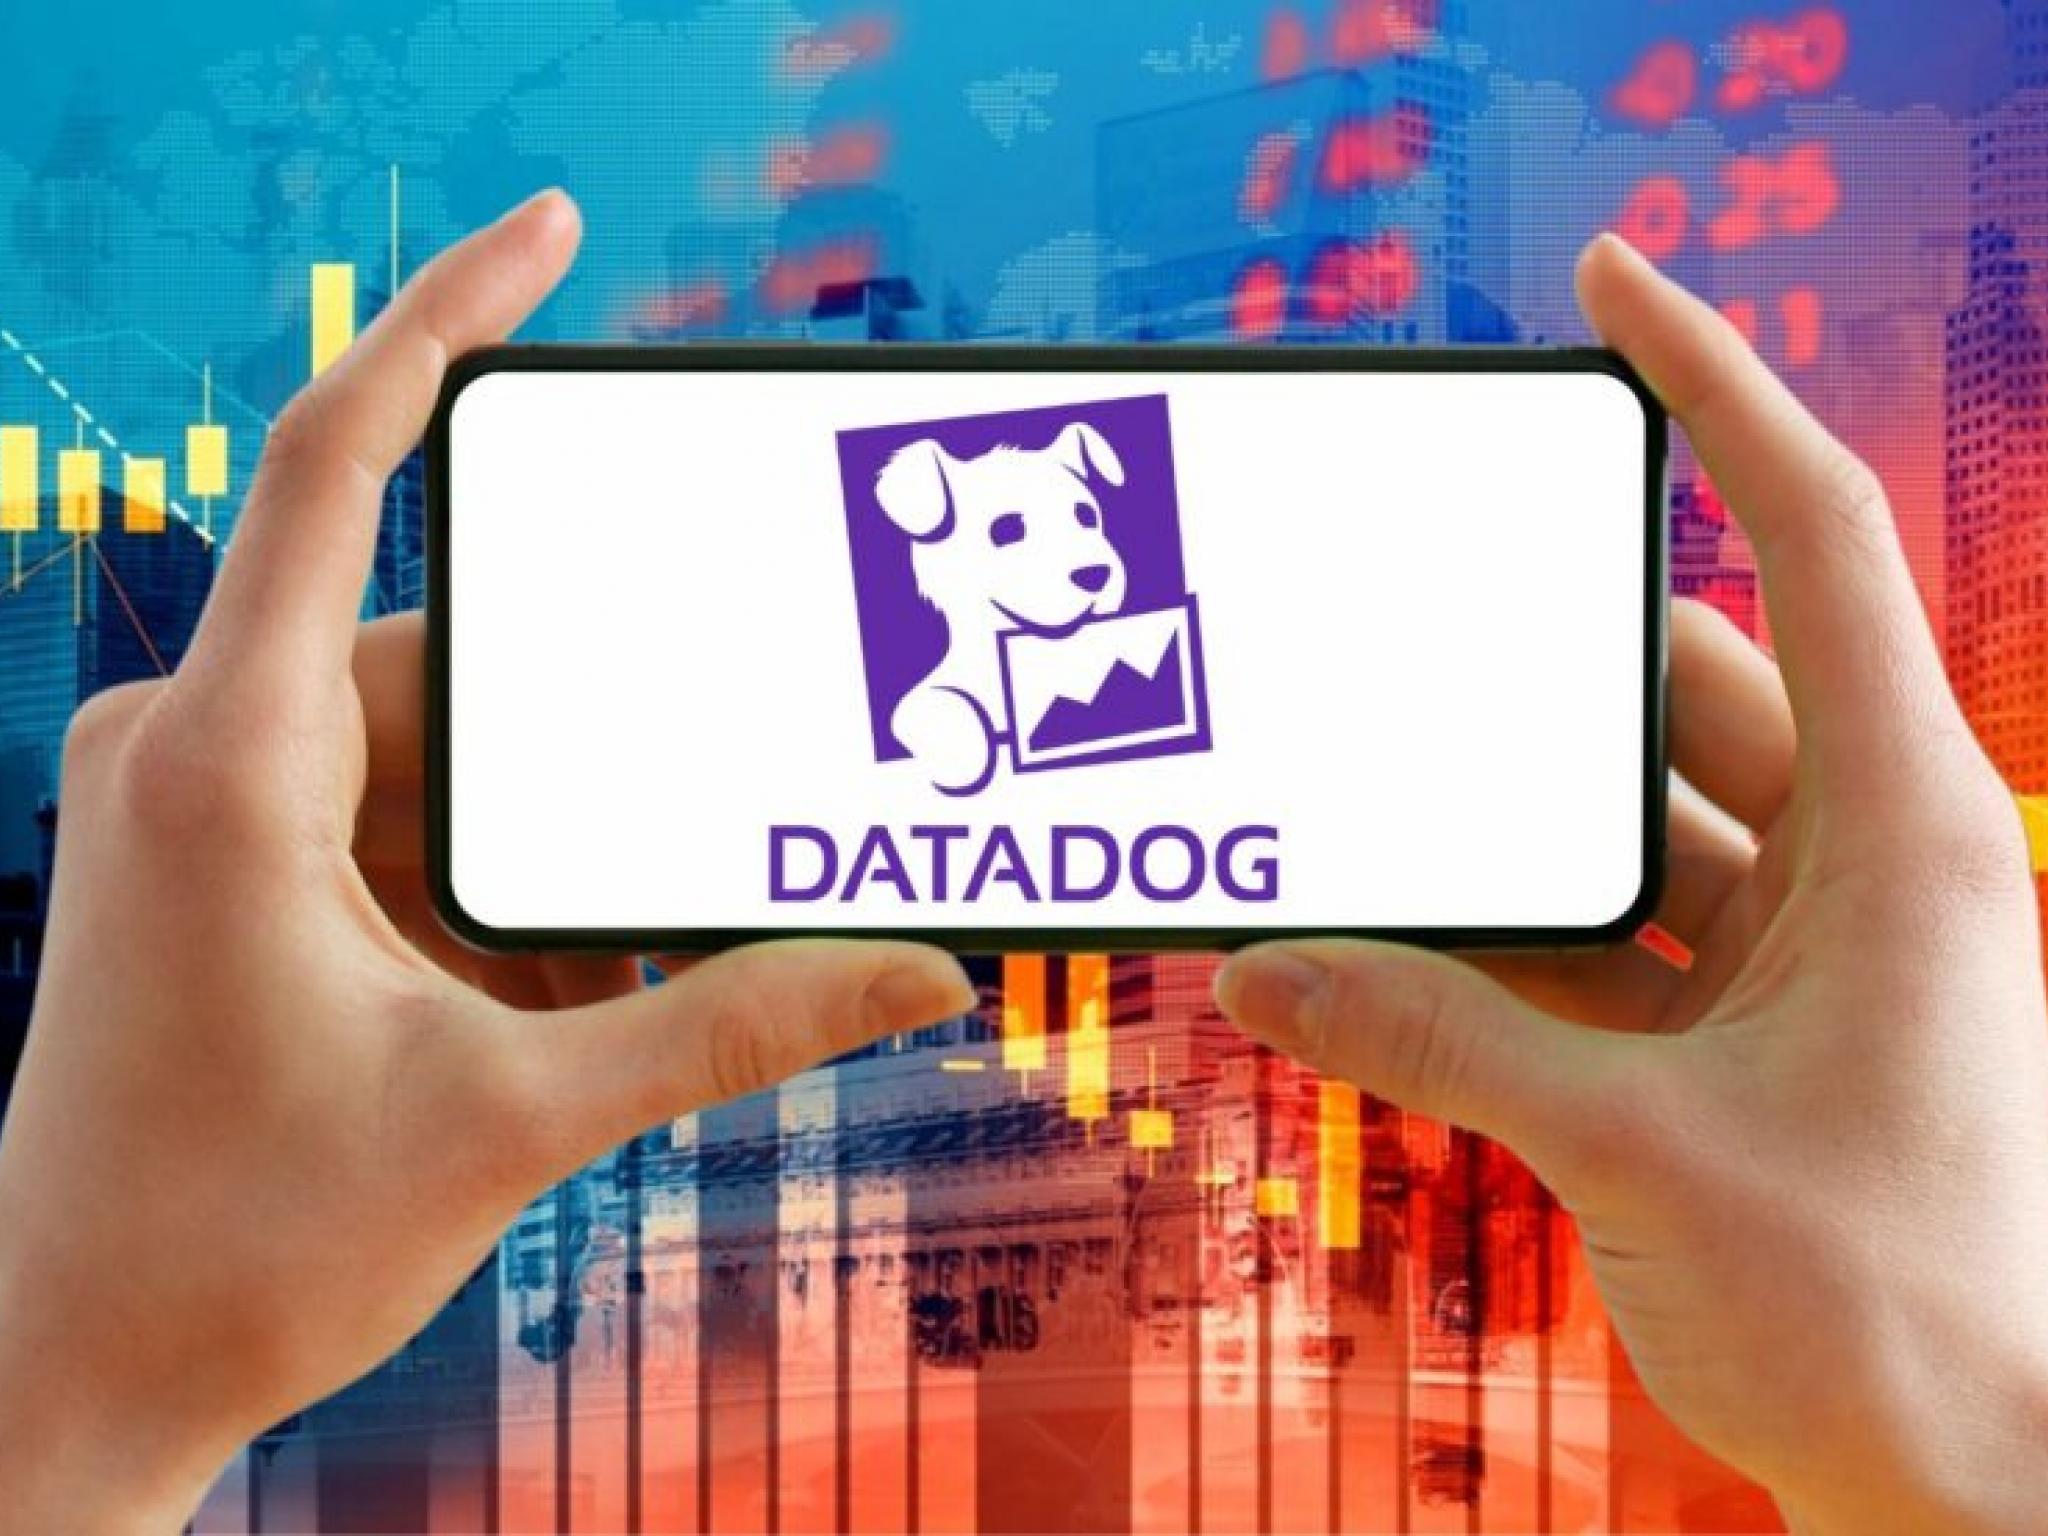  datadog-is-the-next-high-quality-large-cap-stock-says-analyst 